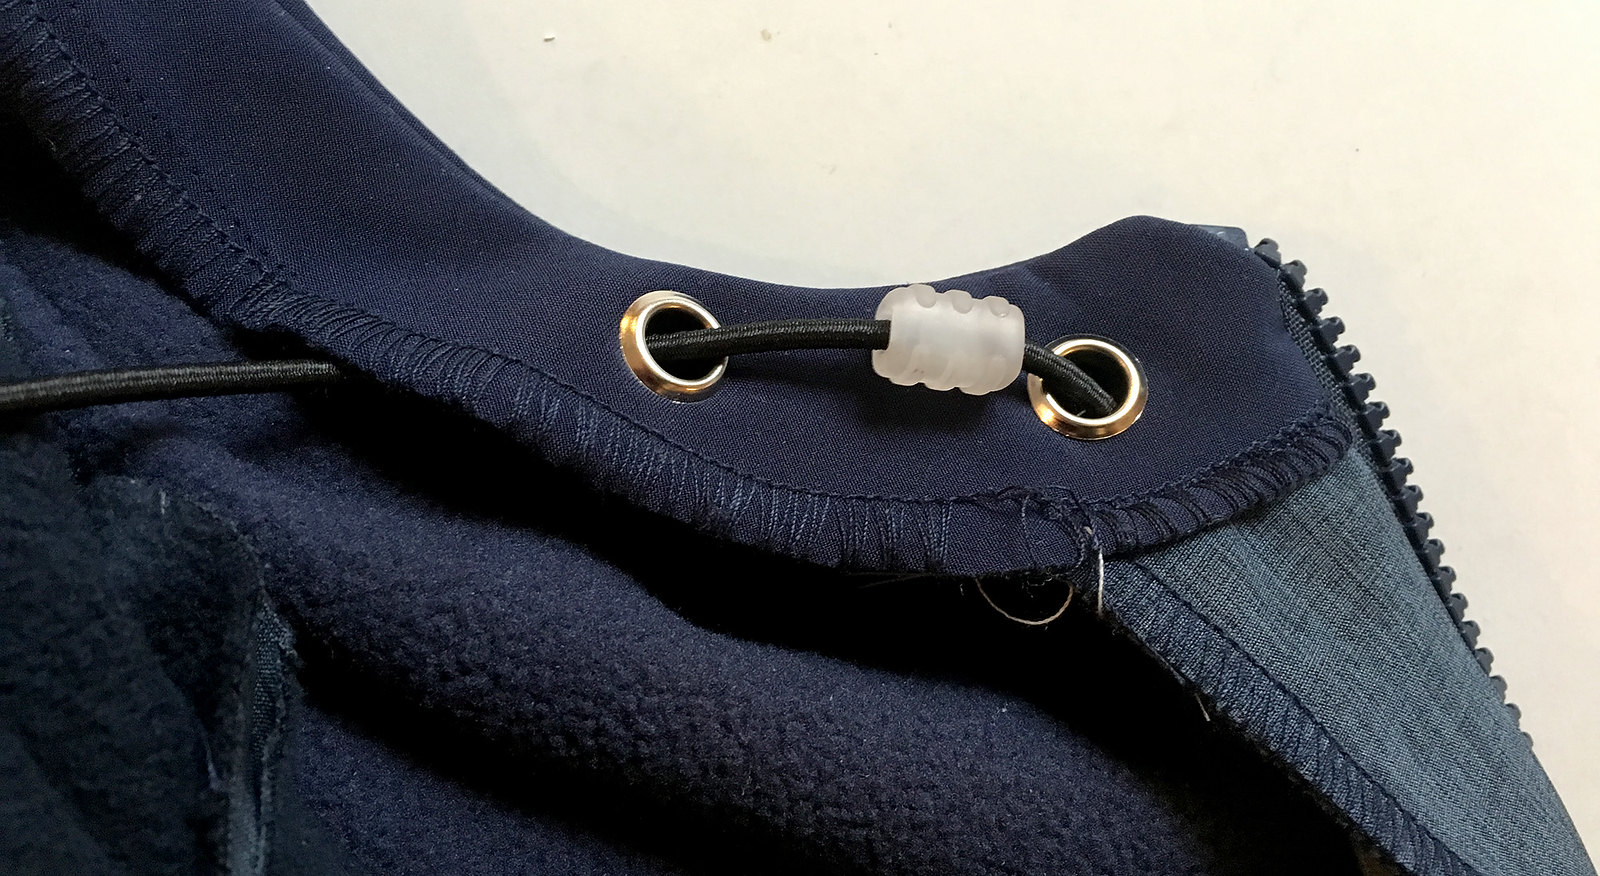 How to add adjustable elastic cord on a jacket